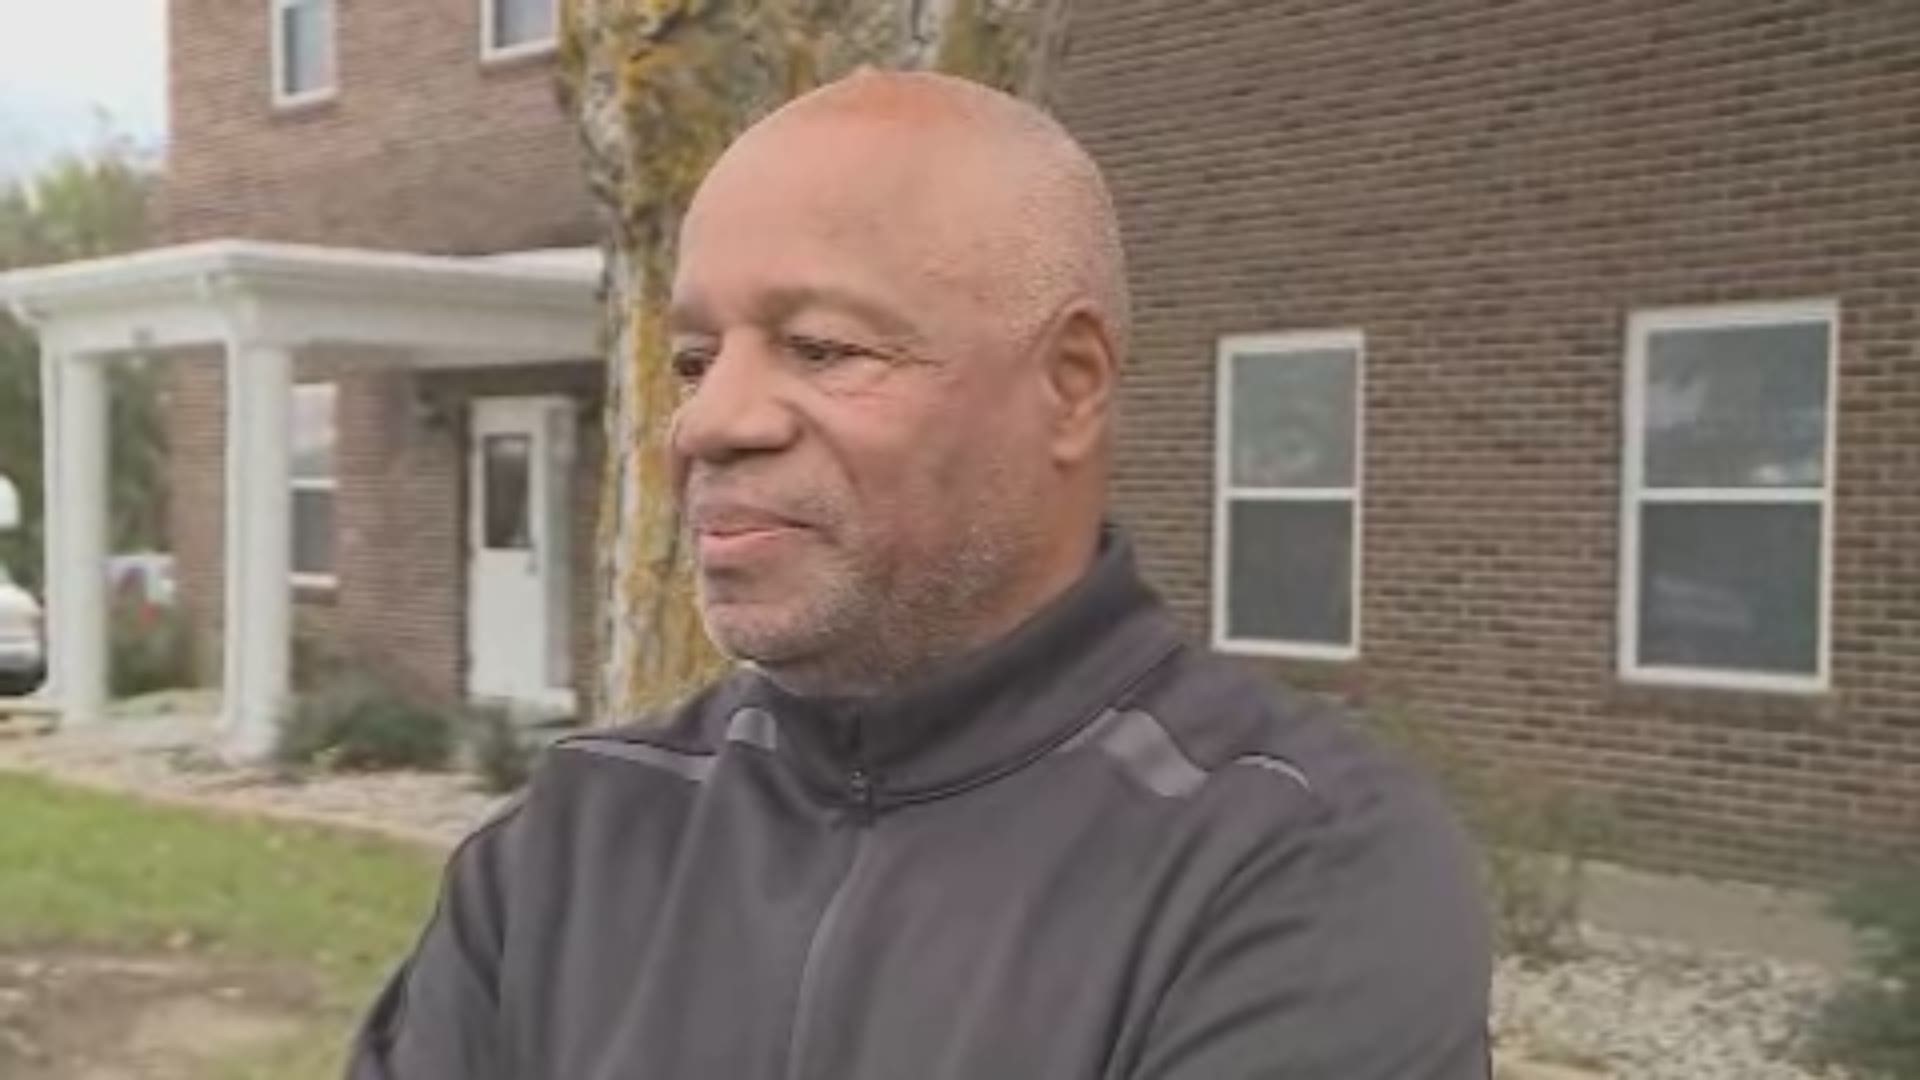 Billy Williams, a staff member at First Baptist Church, said they have cameras up on the church property and discusses the suspect coming on the property.